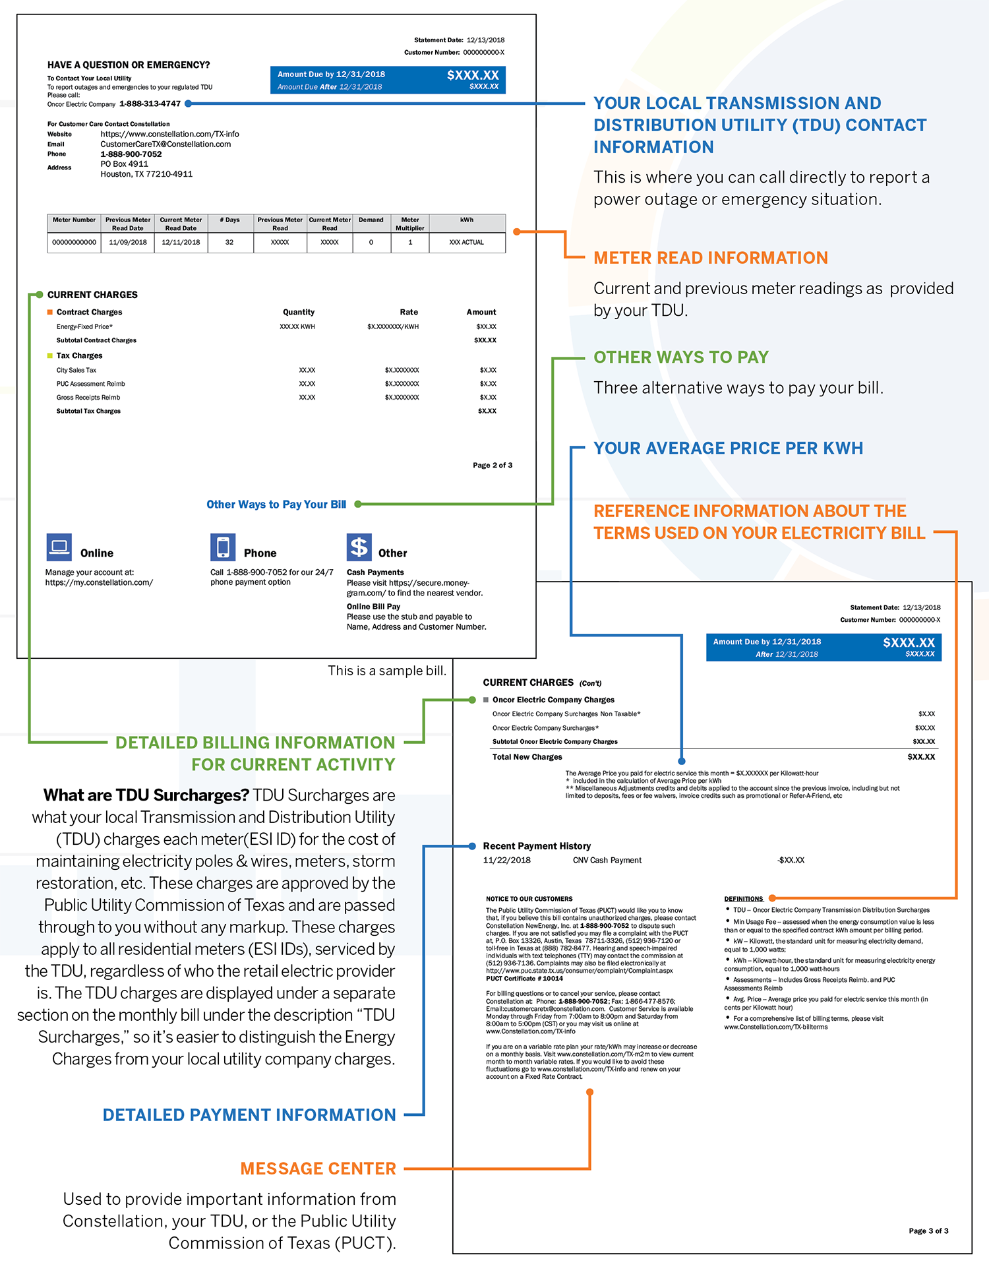 Understanding your Texas Electric Bill from Constellation - pages 2 and 3